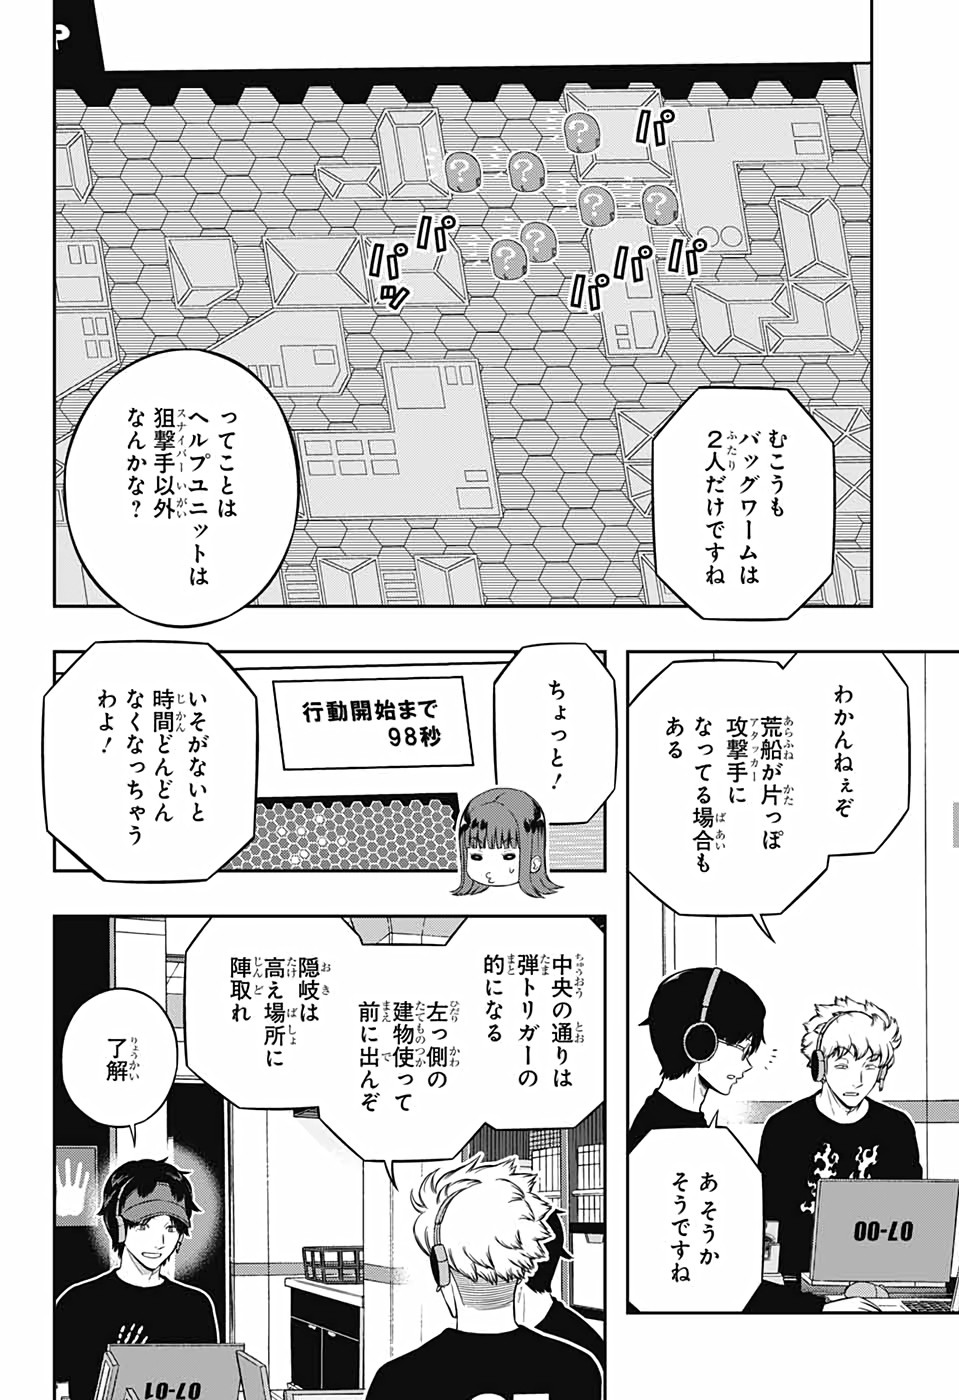 World Trigger - Chapter 216 - Page 2